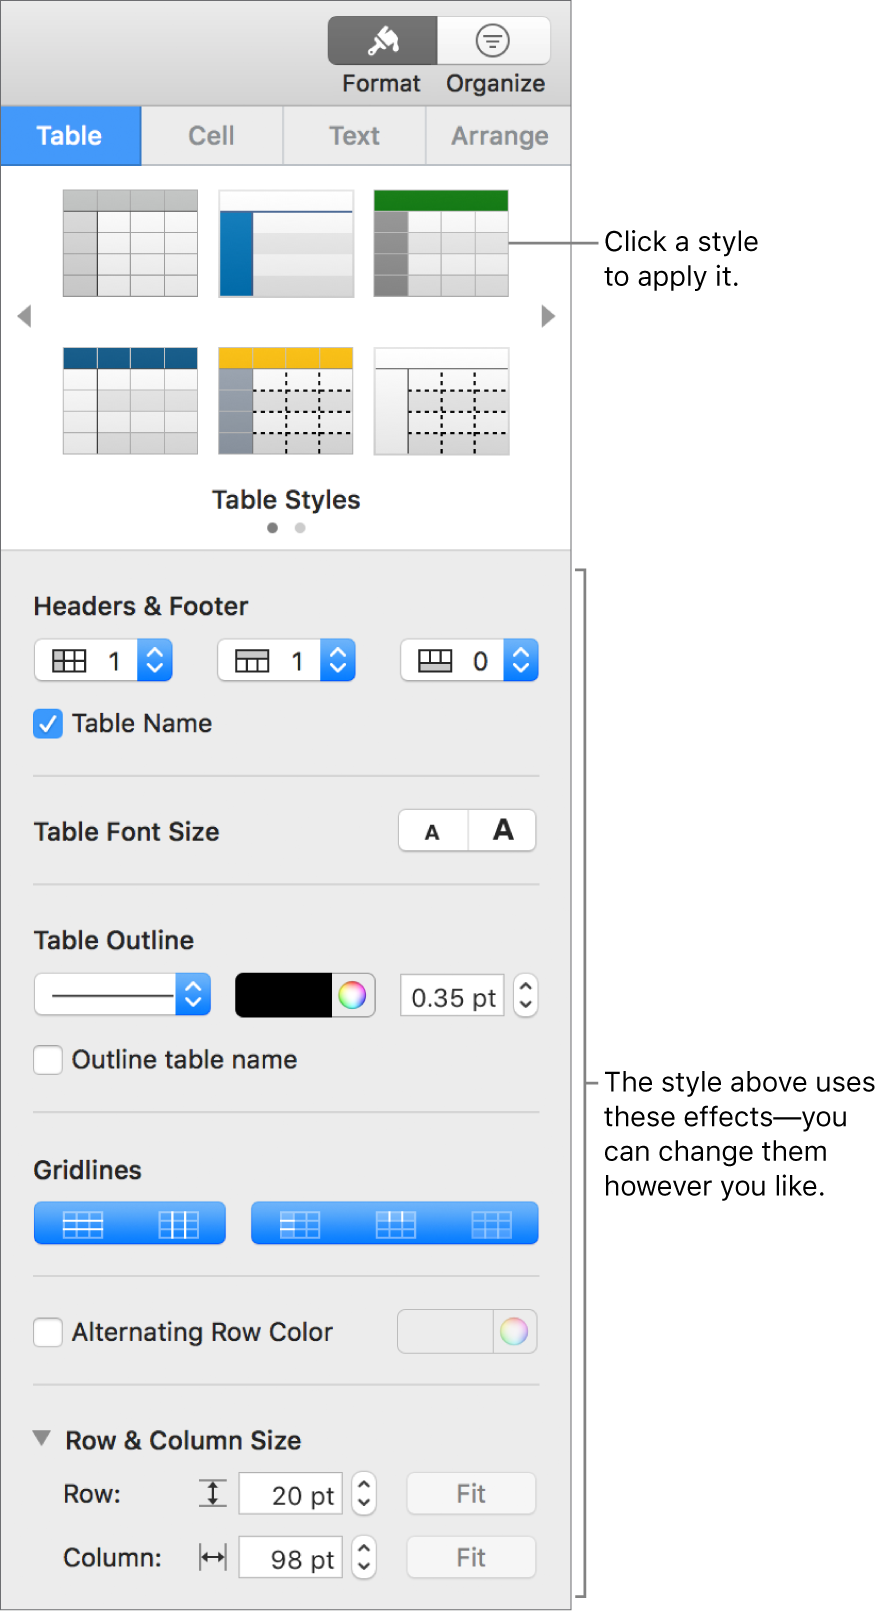 The Format sidebar showing table styles and formatting options.